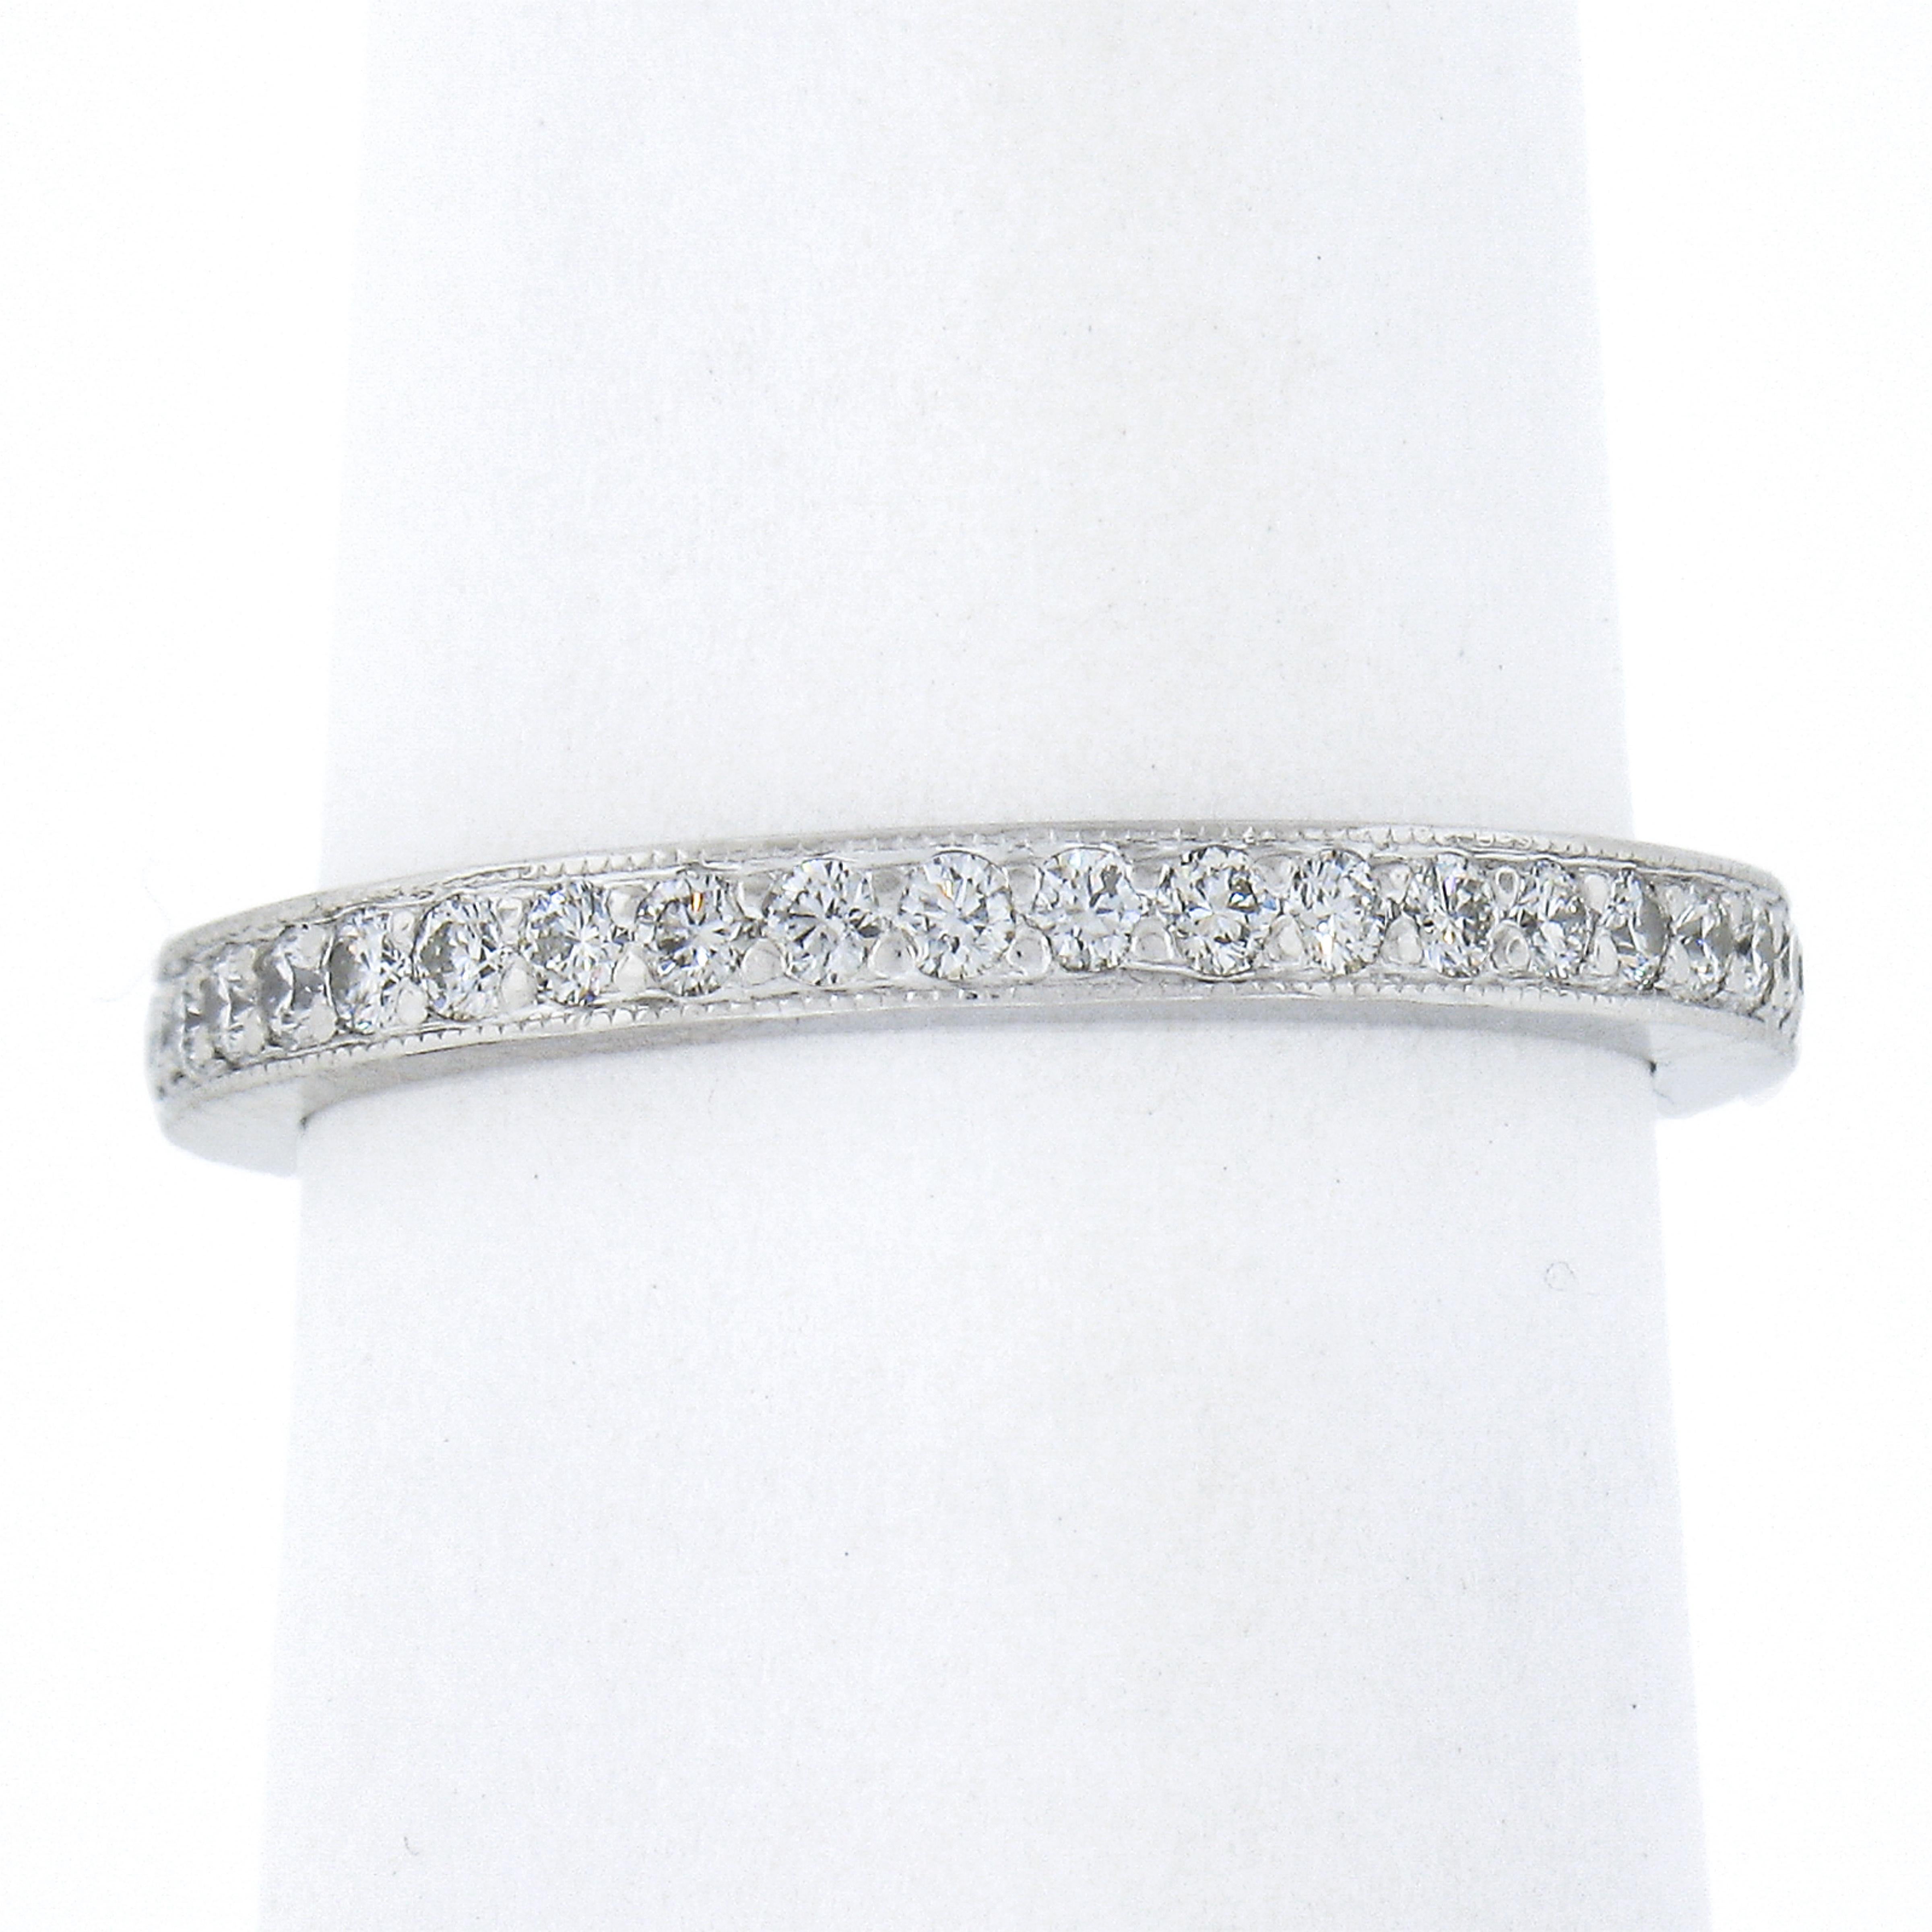 This stunning eternity band ring by Tiffany & Co. is crafted in solid platinum and features 40 high quality diamond stones which are neatly pave set throughout the entire band. This classic and well made eternity ring looks incredibly glamorous